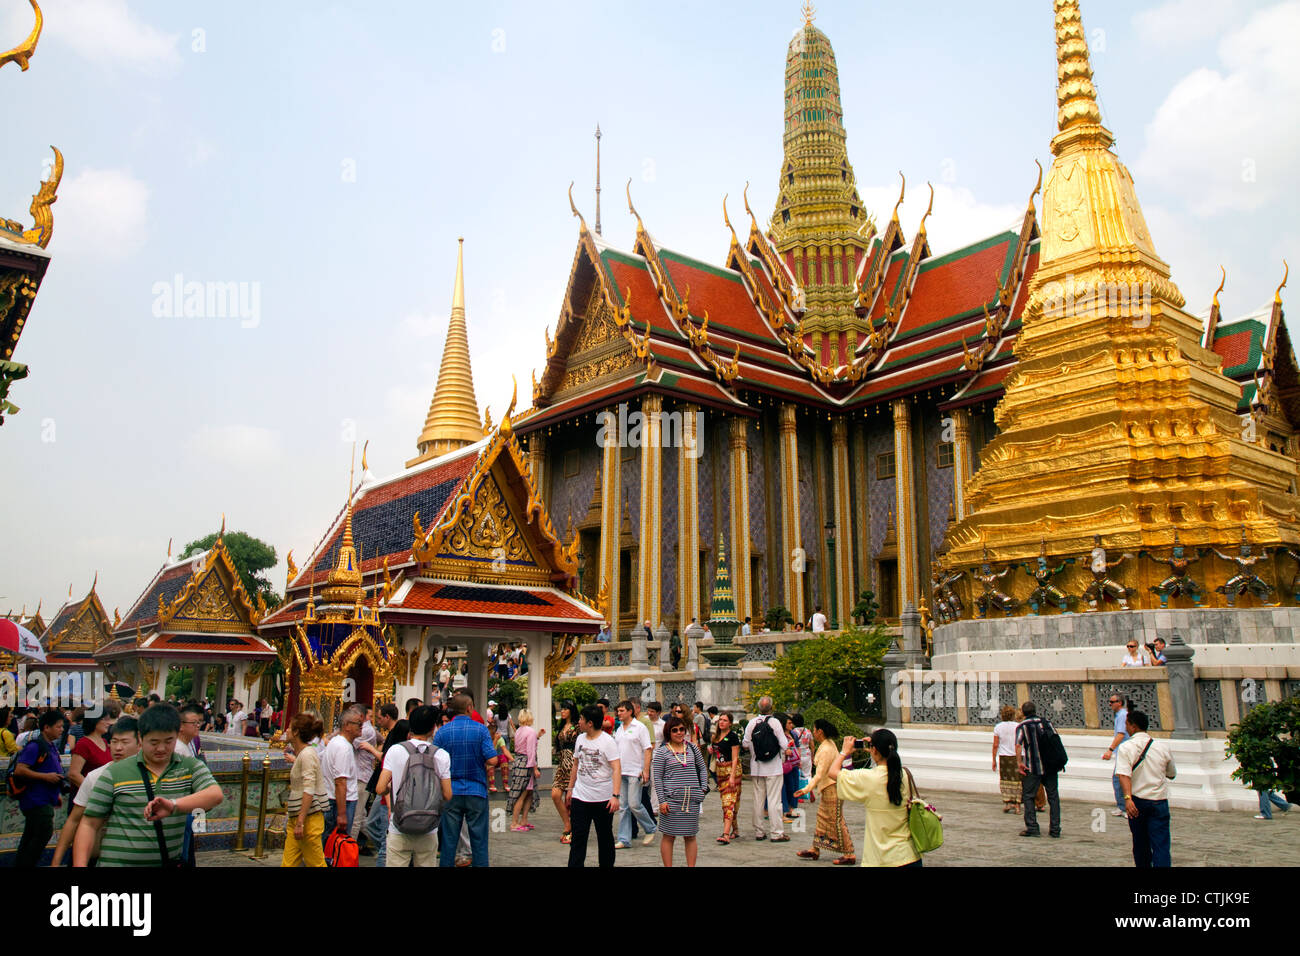 The Temple of the Emerald Buddha located within the precincts of the Grand Palace, Bangkok, Thailand. Stock Photo